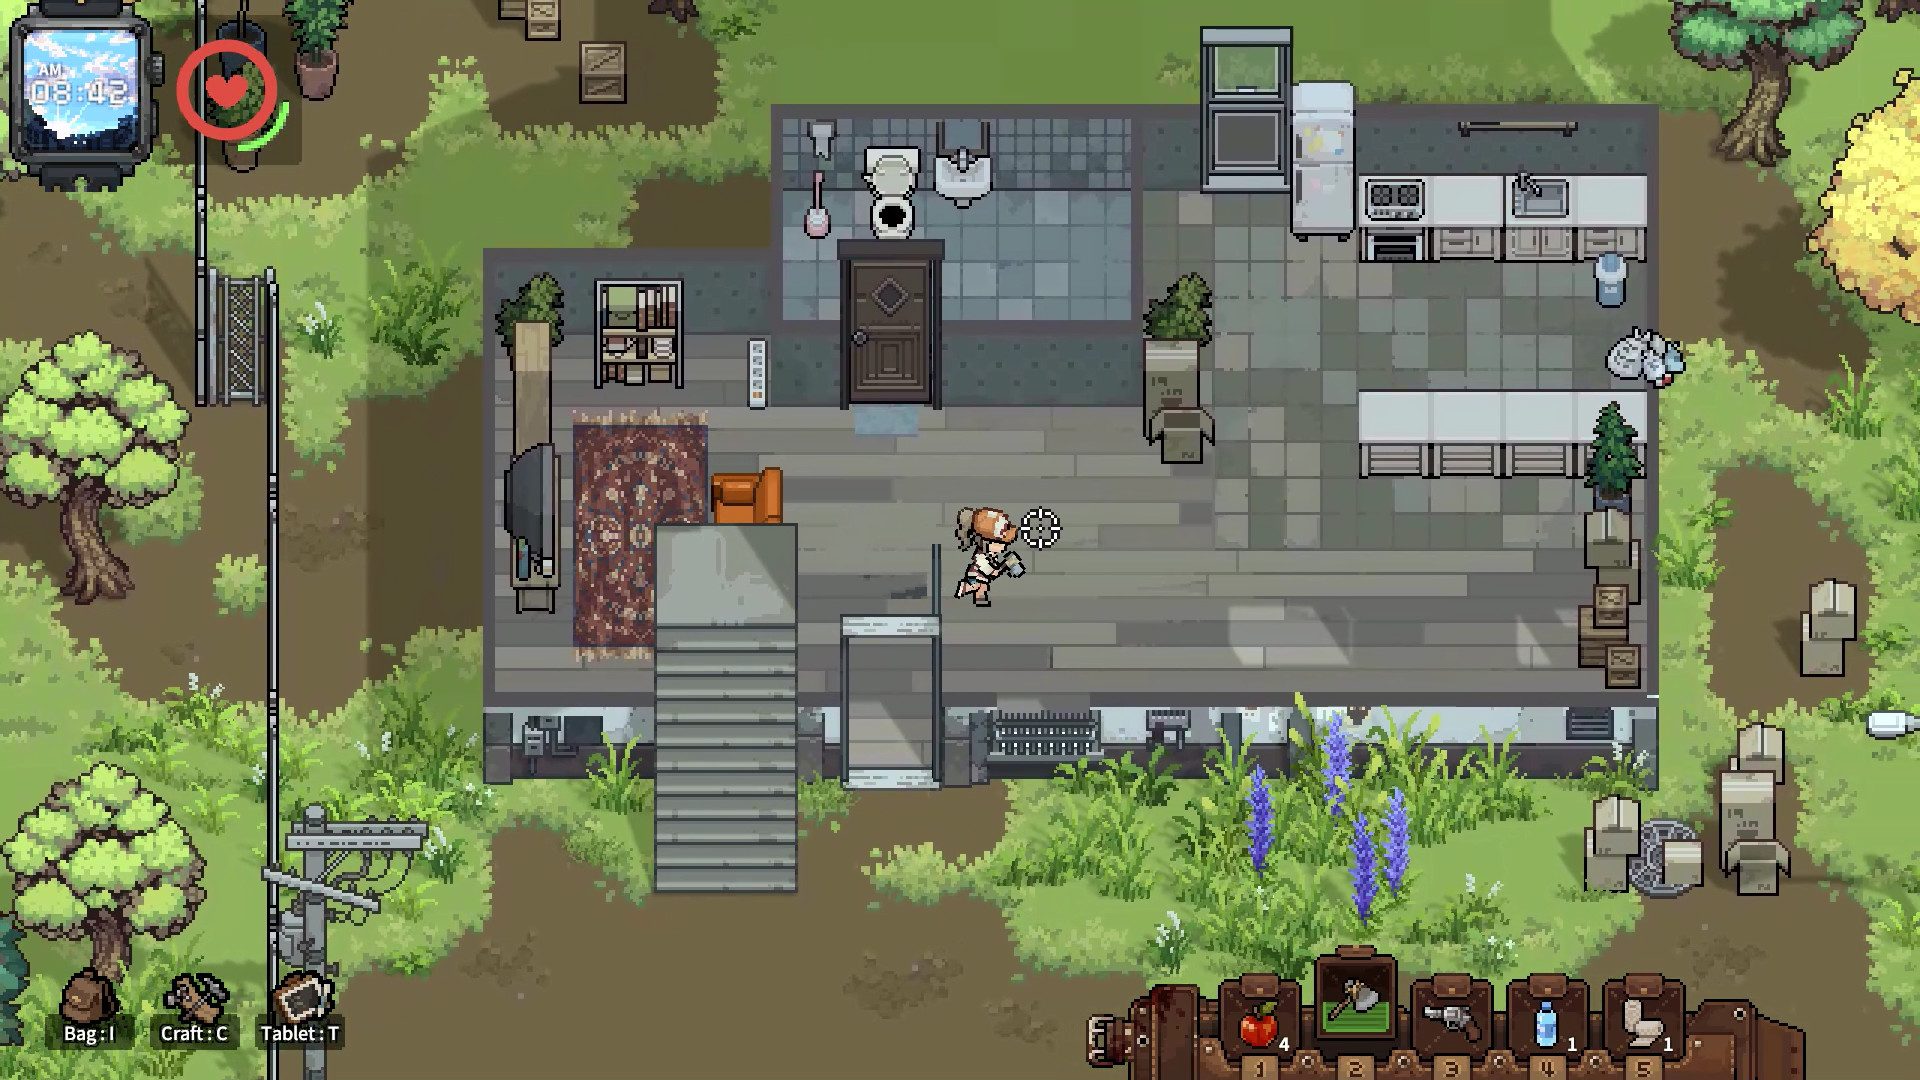 Mini DAYZ: Zombie Survival on the App Store